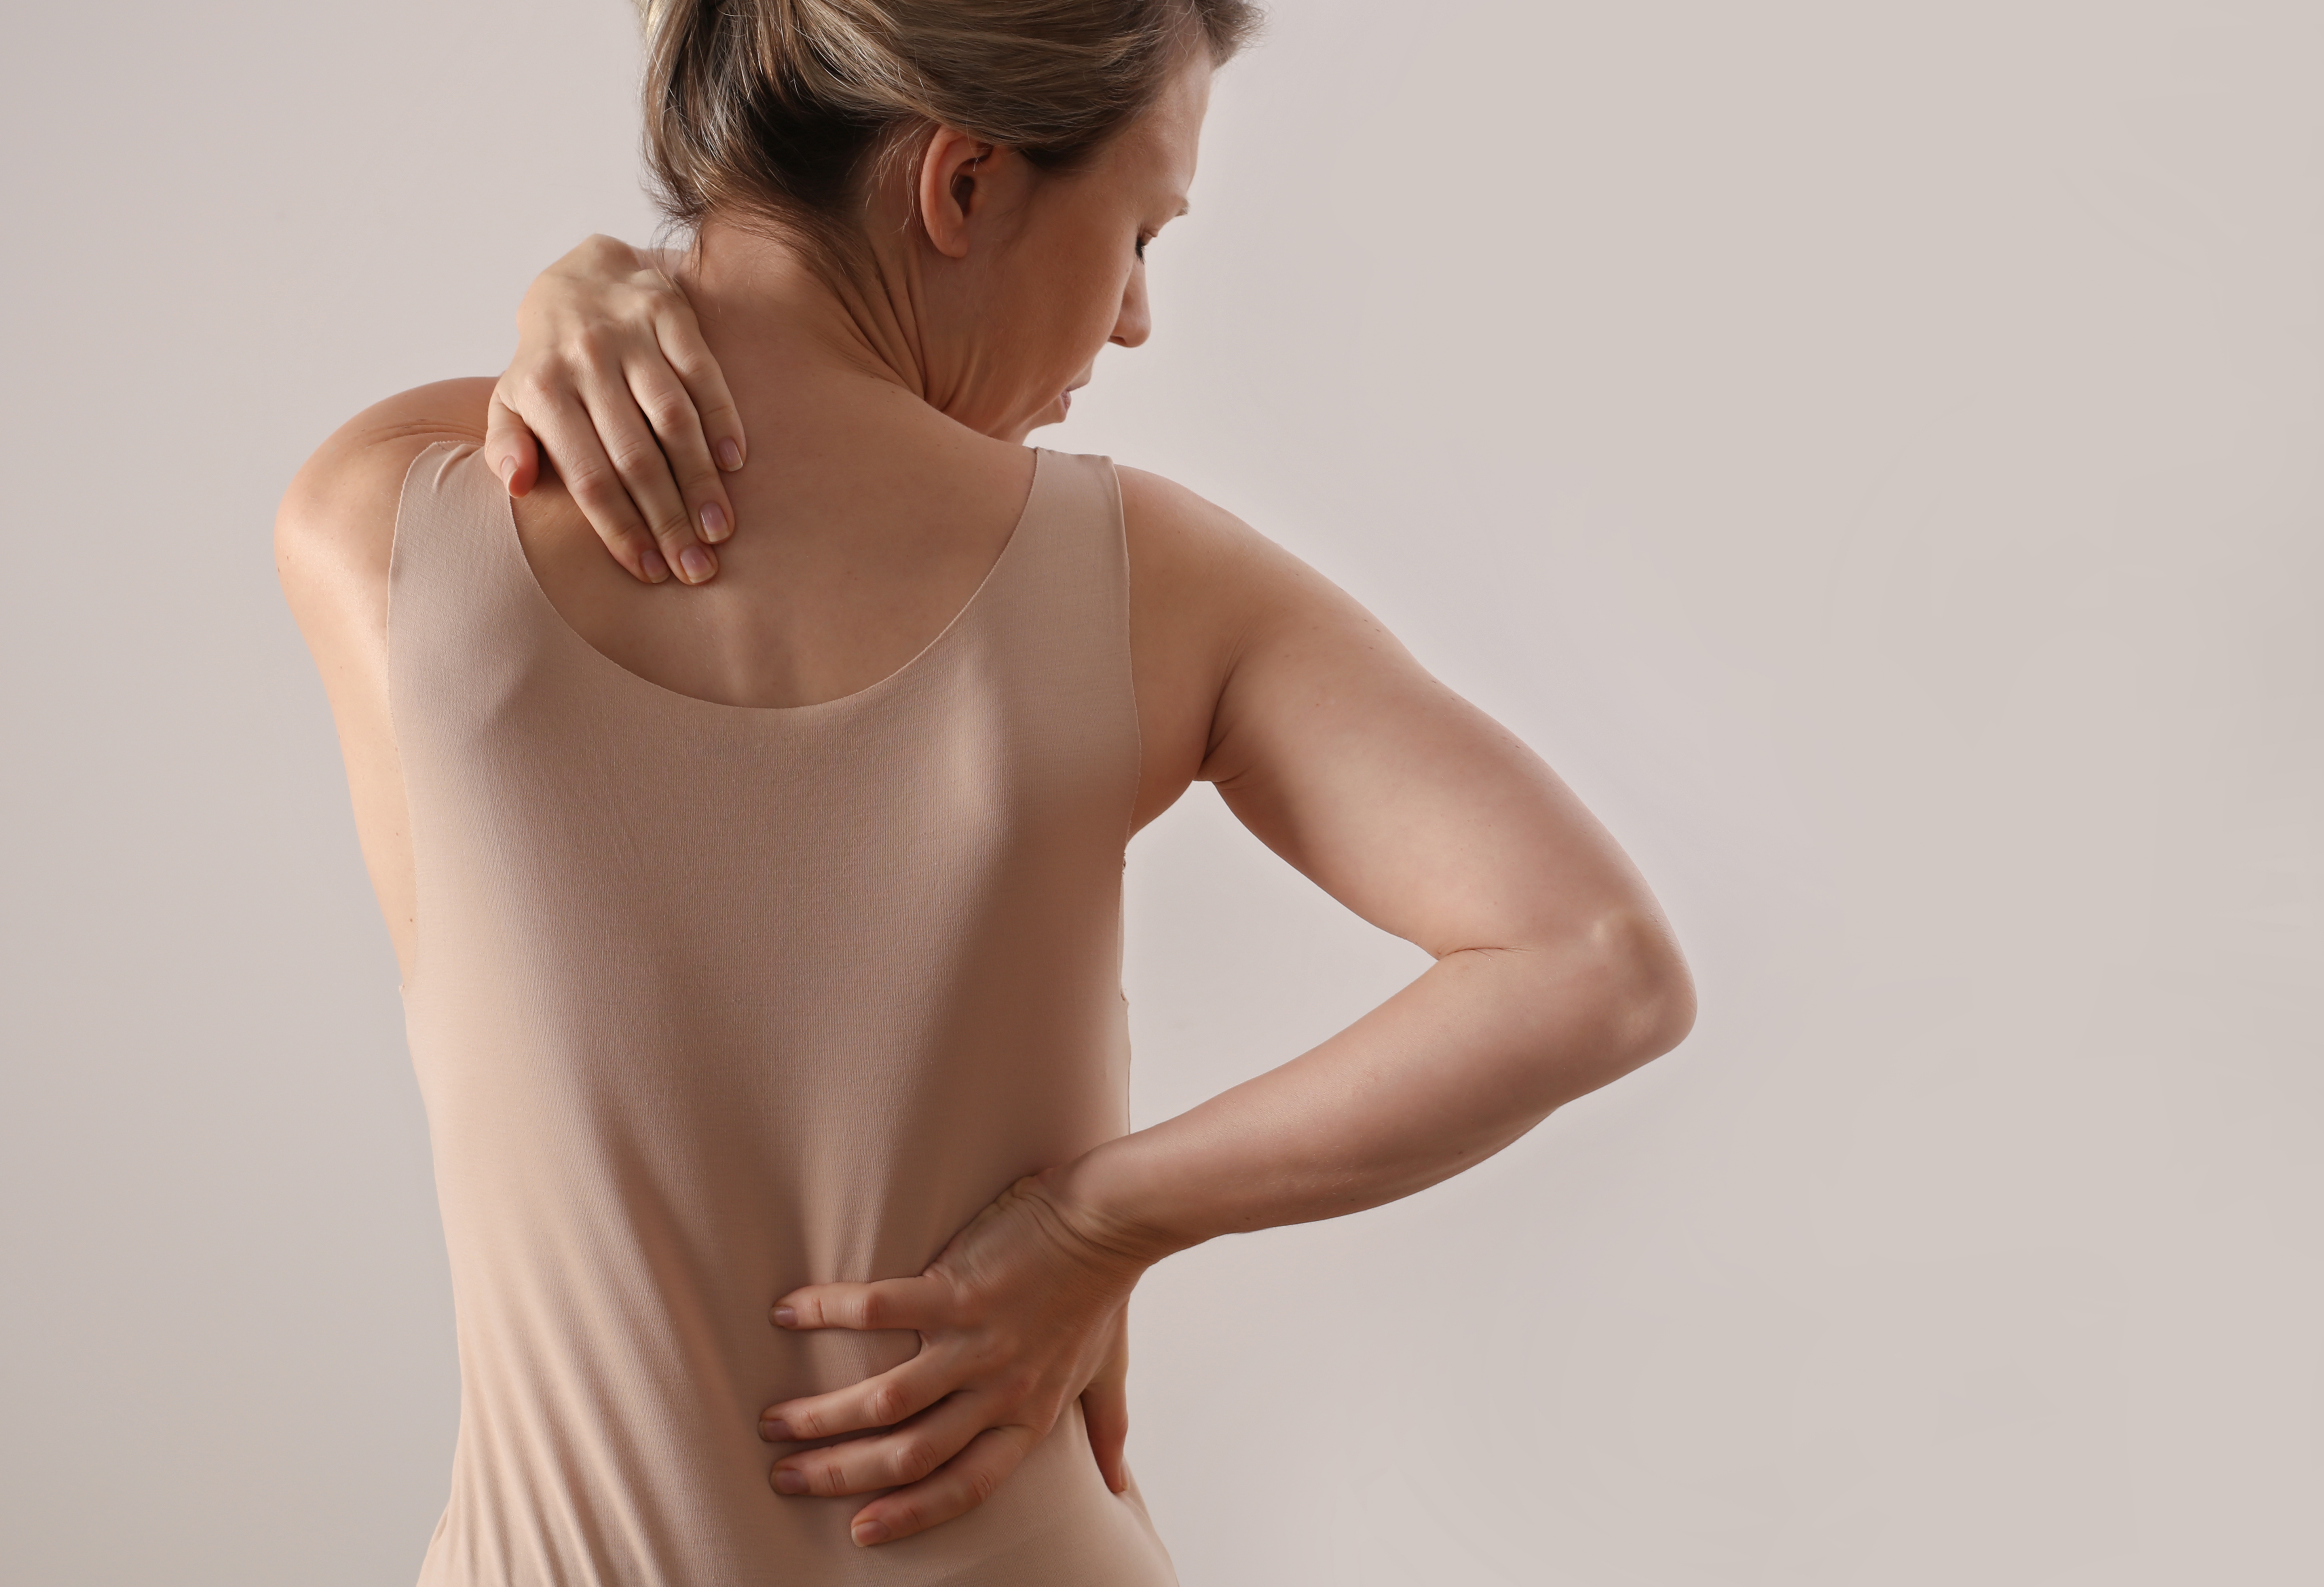 A woman with back pain and scoliosis. She is clutching her low back and neck.